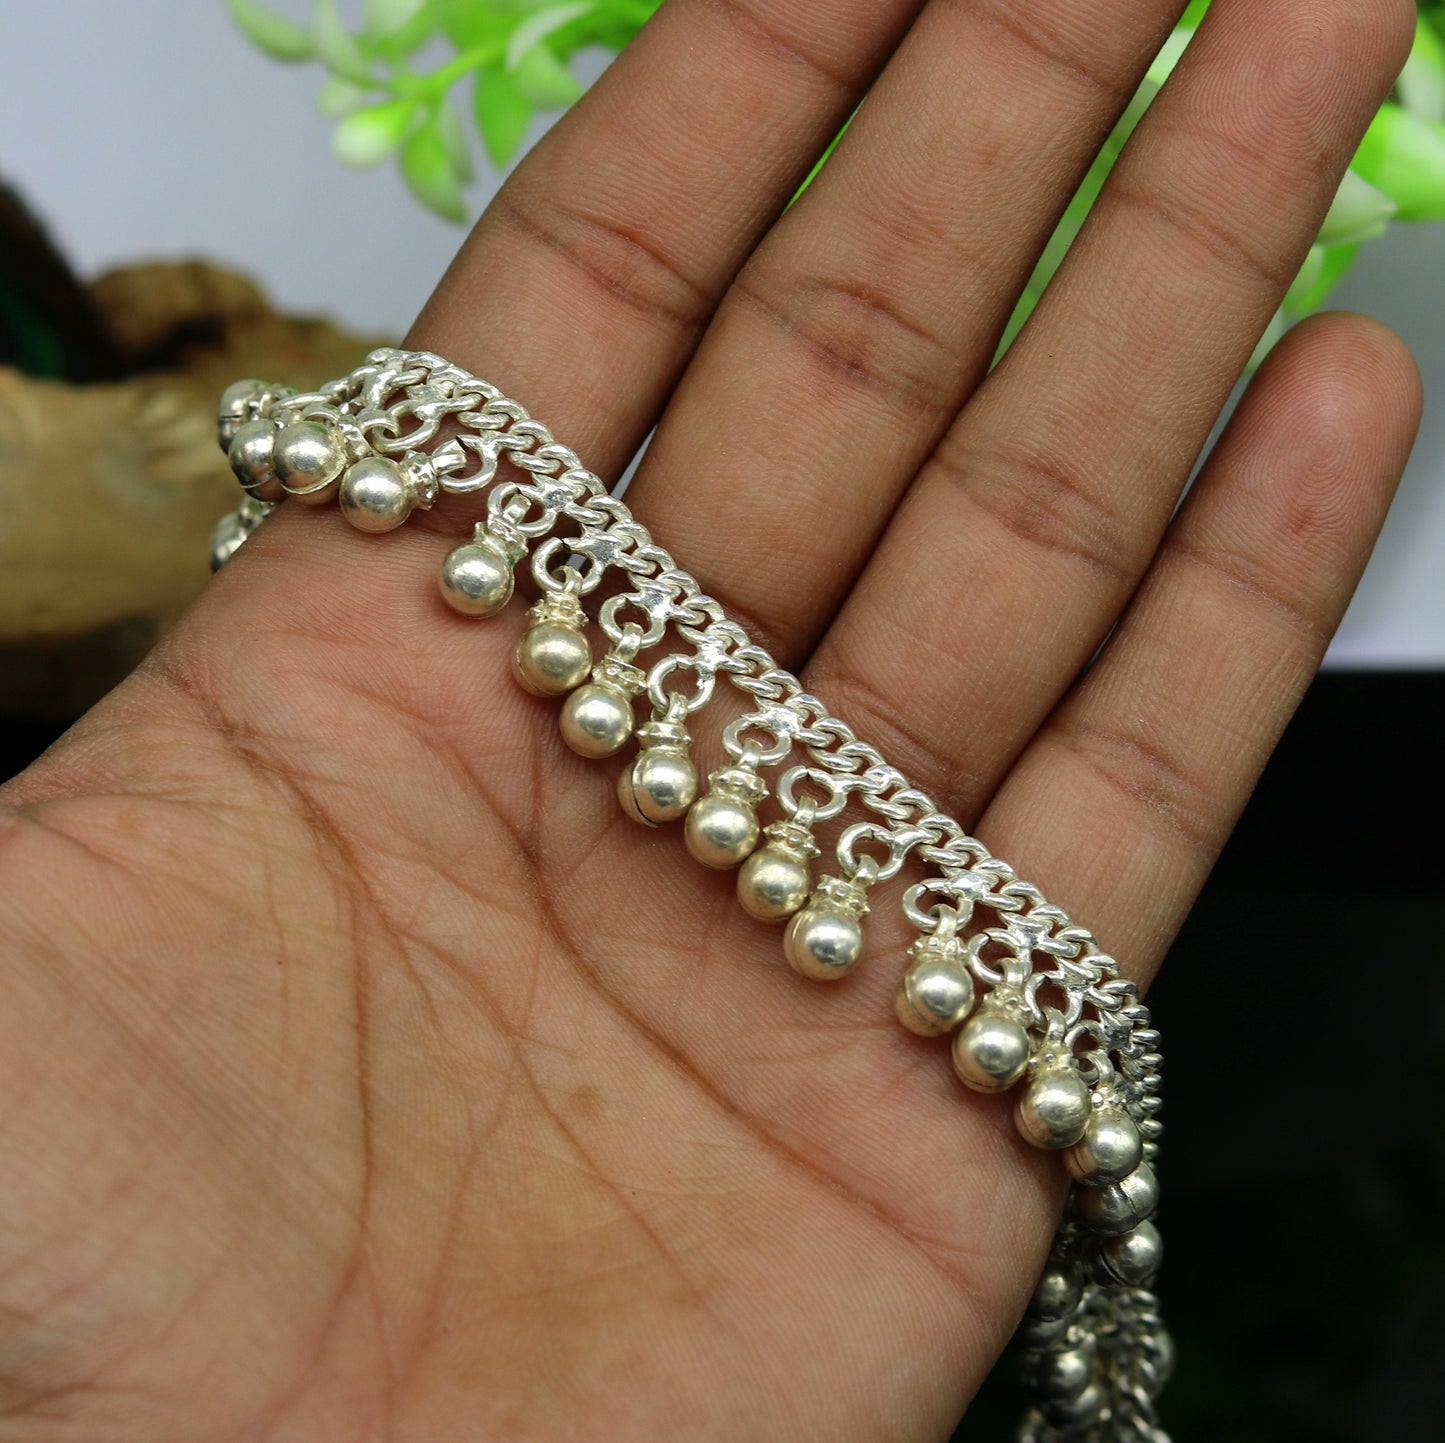 Solid sterling silver handmade vintage antique noisy single anklet ,amazing ethnic tribal ankle jewelry belly dance jewelry ank244 - TRIBAL ORNAMENTS